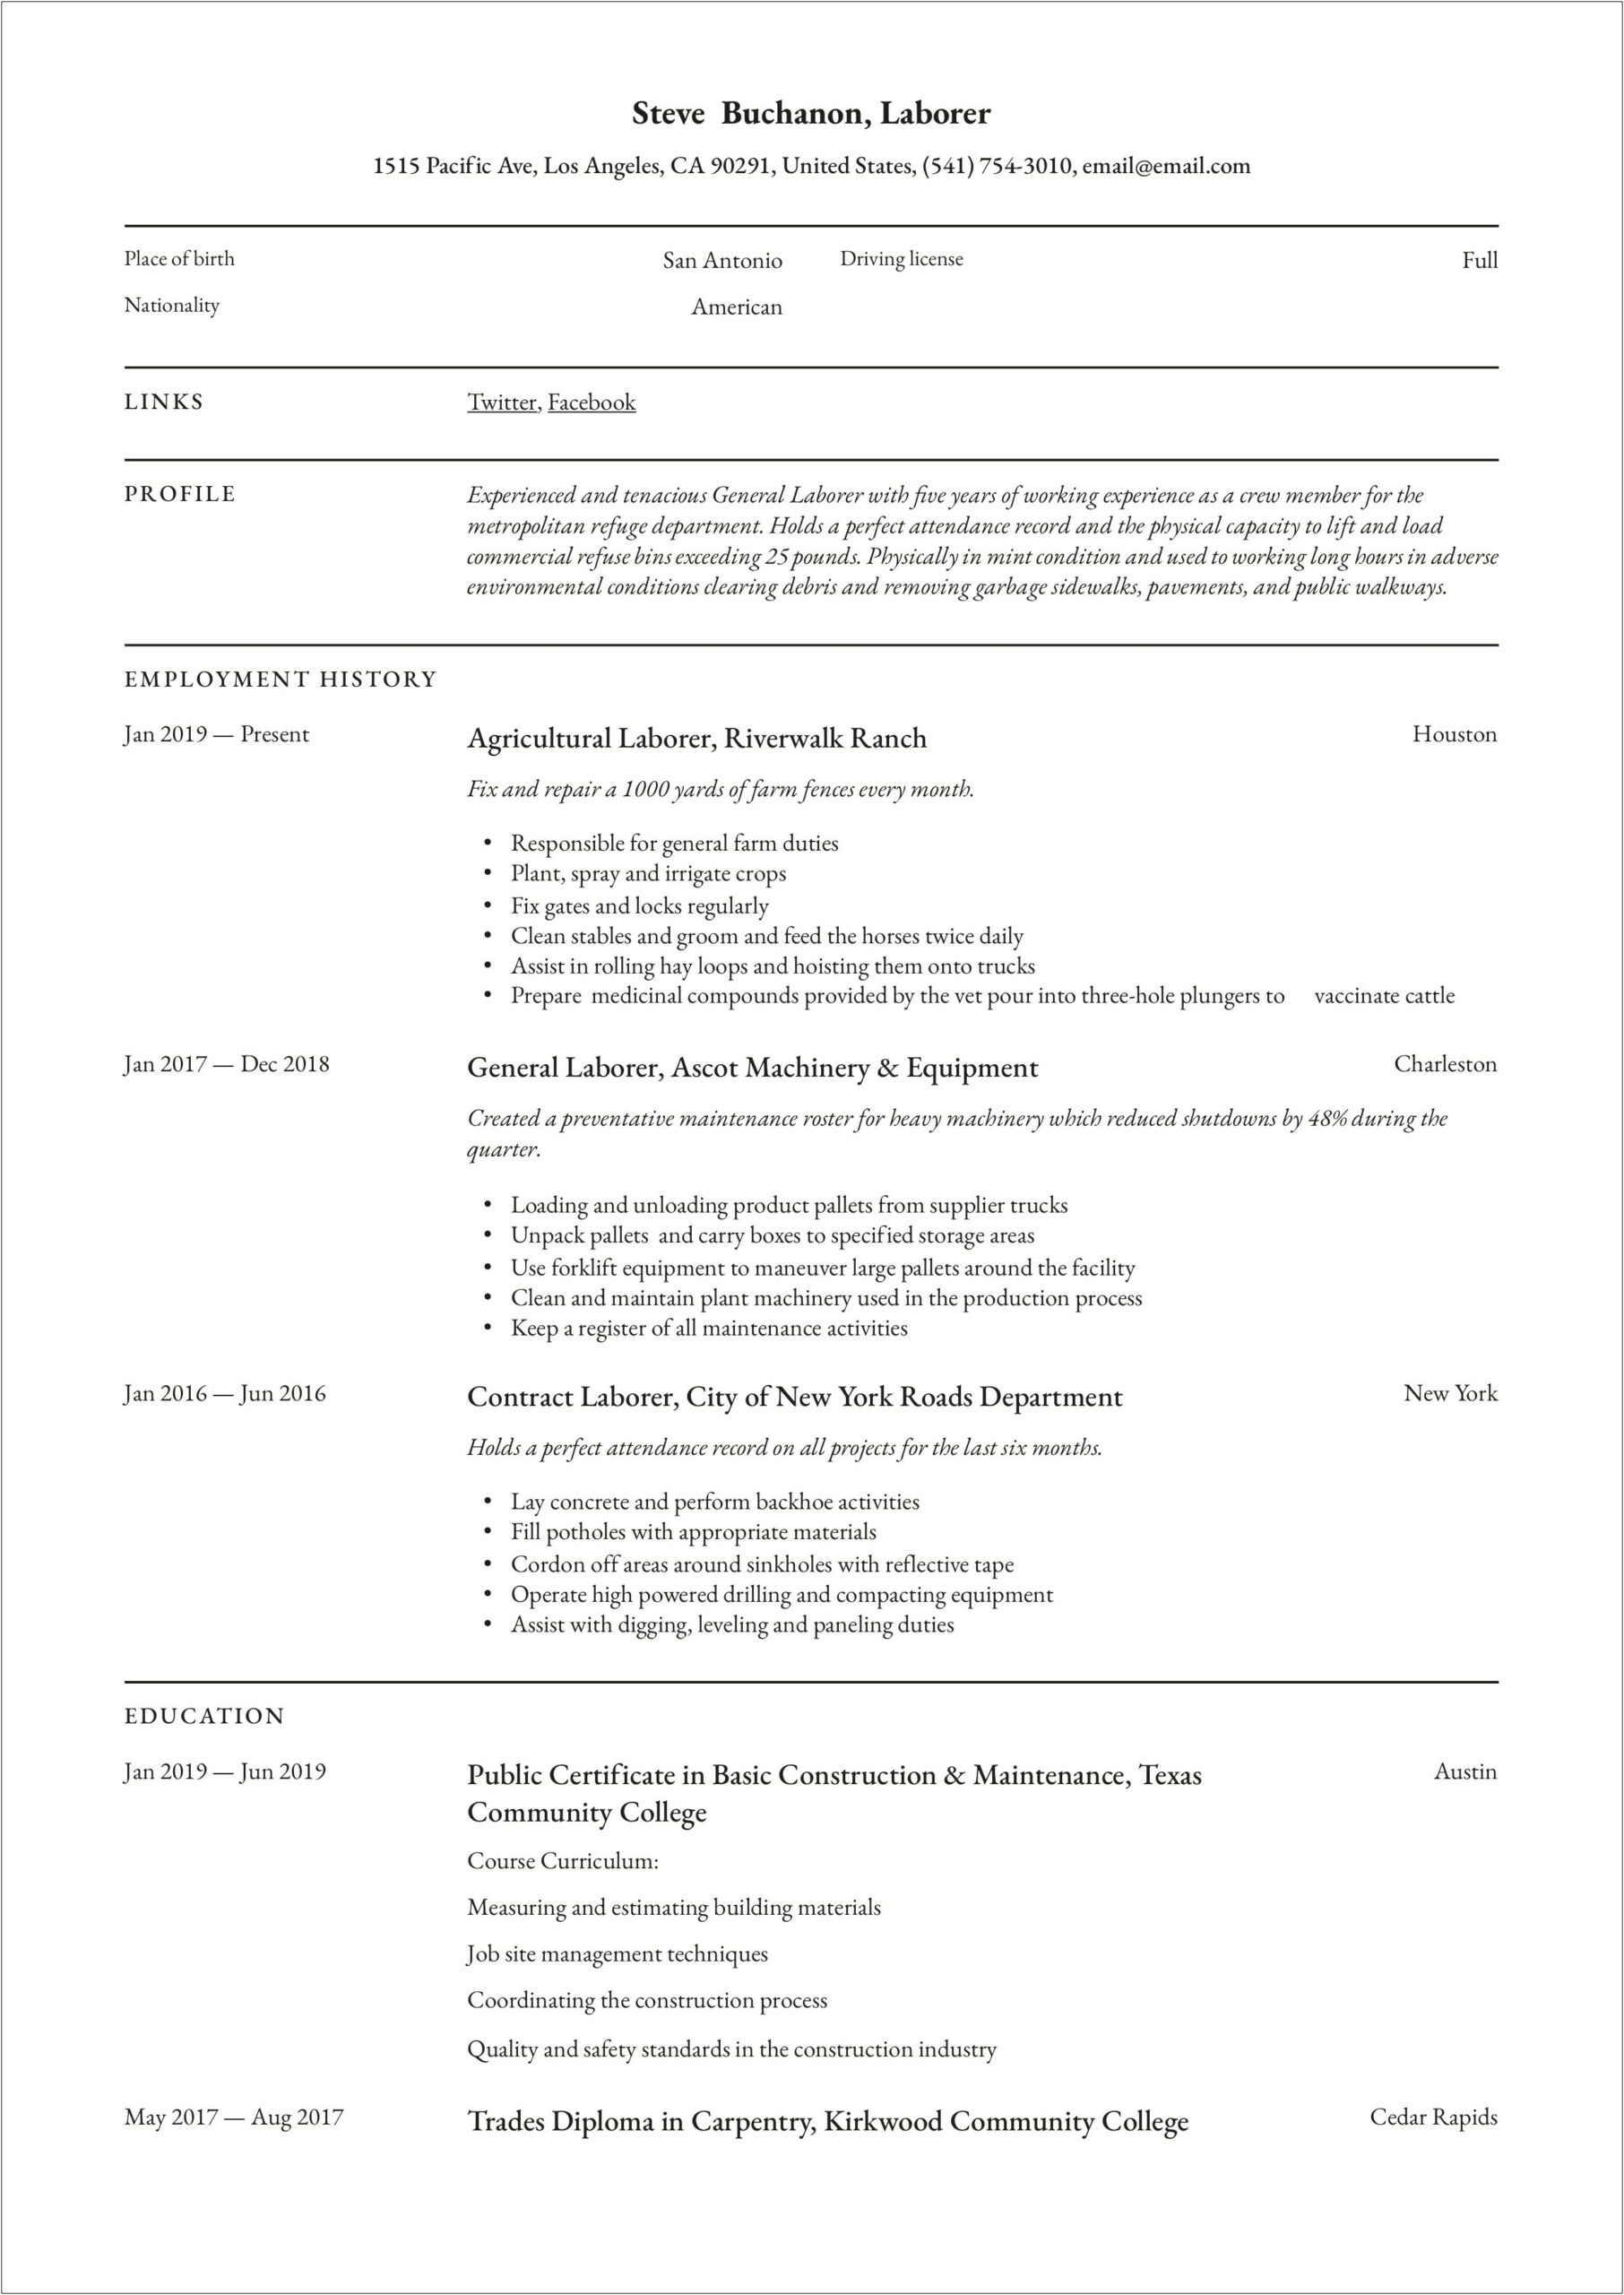 Resume Objective Examples For General Labor